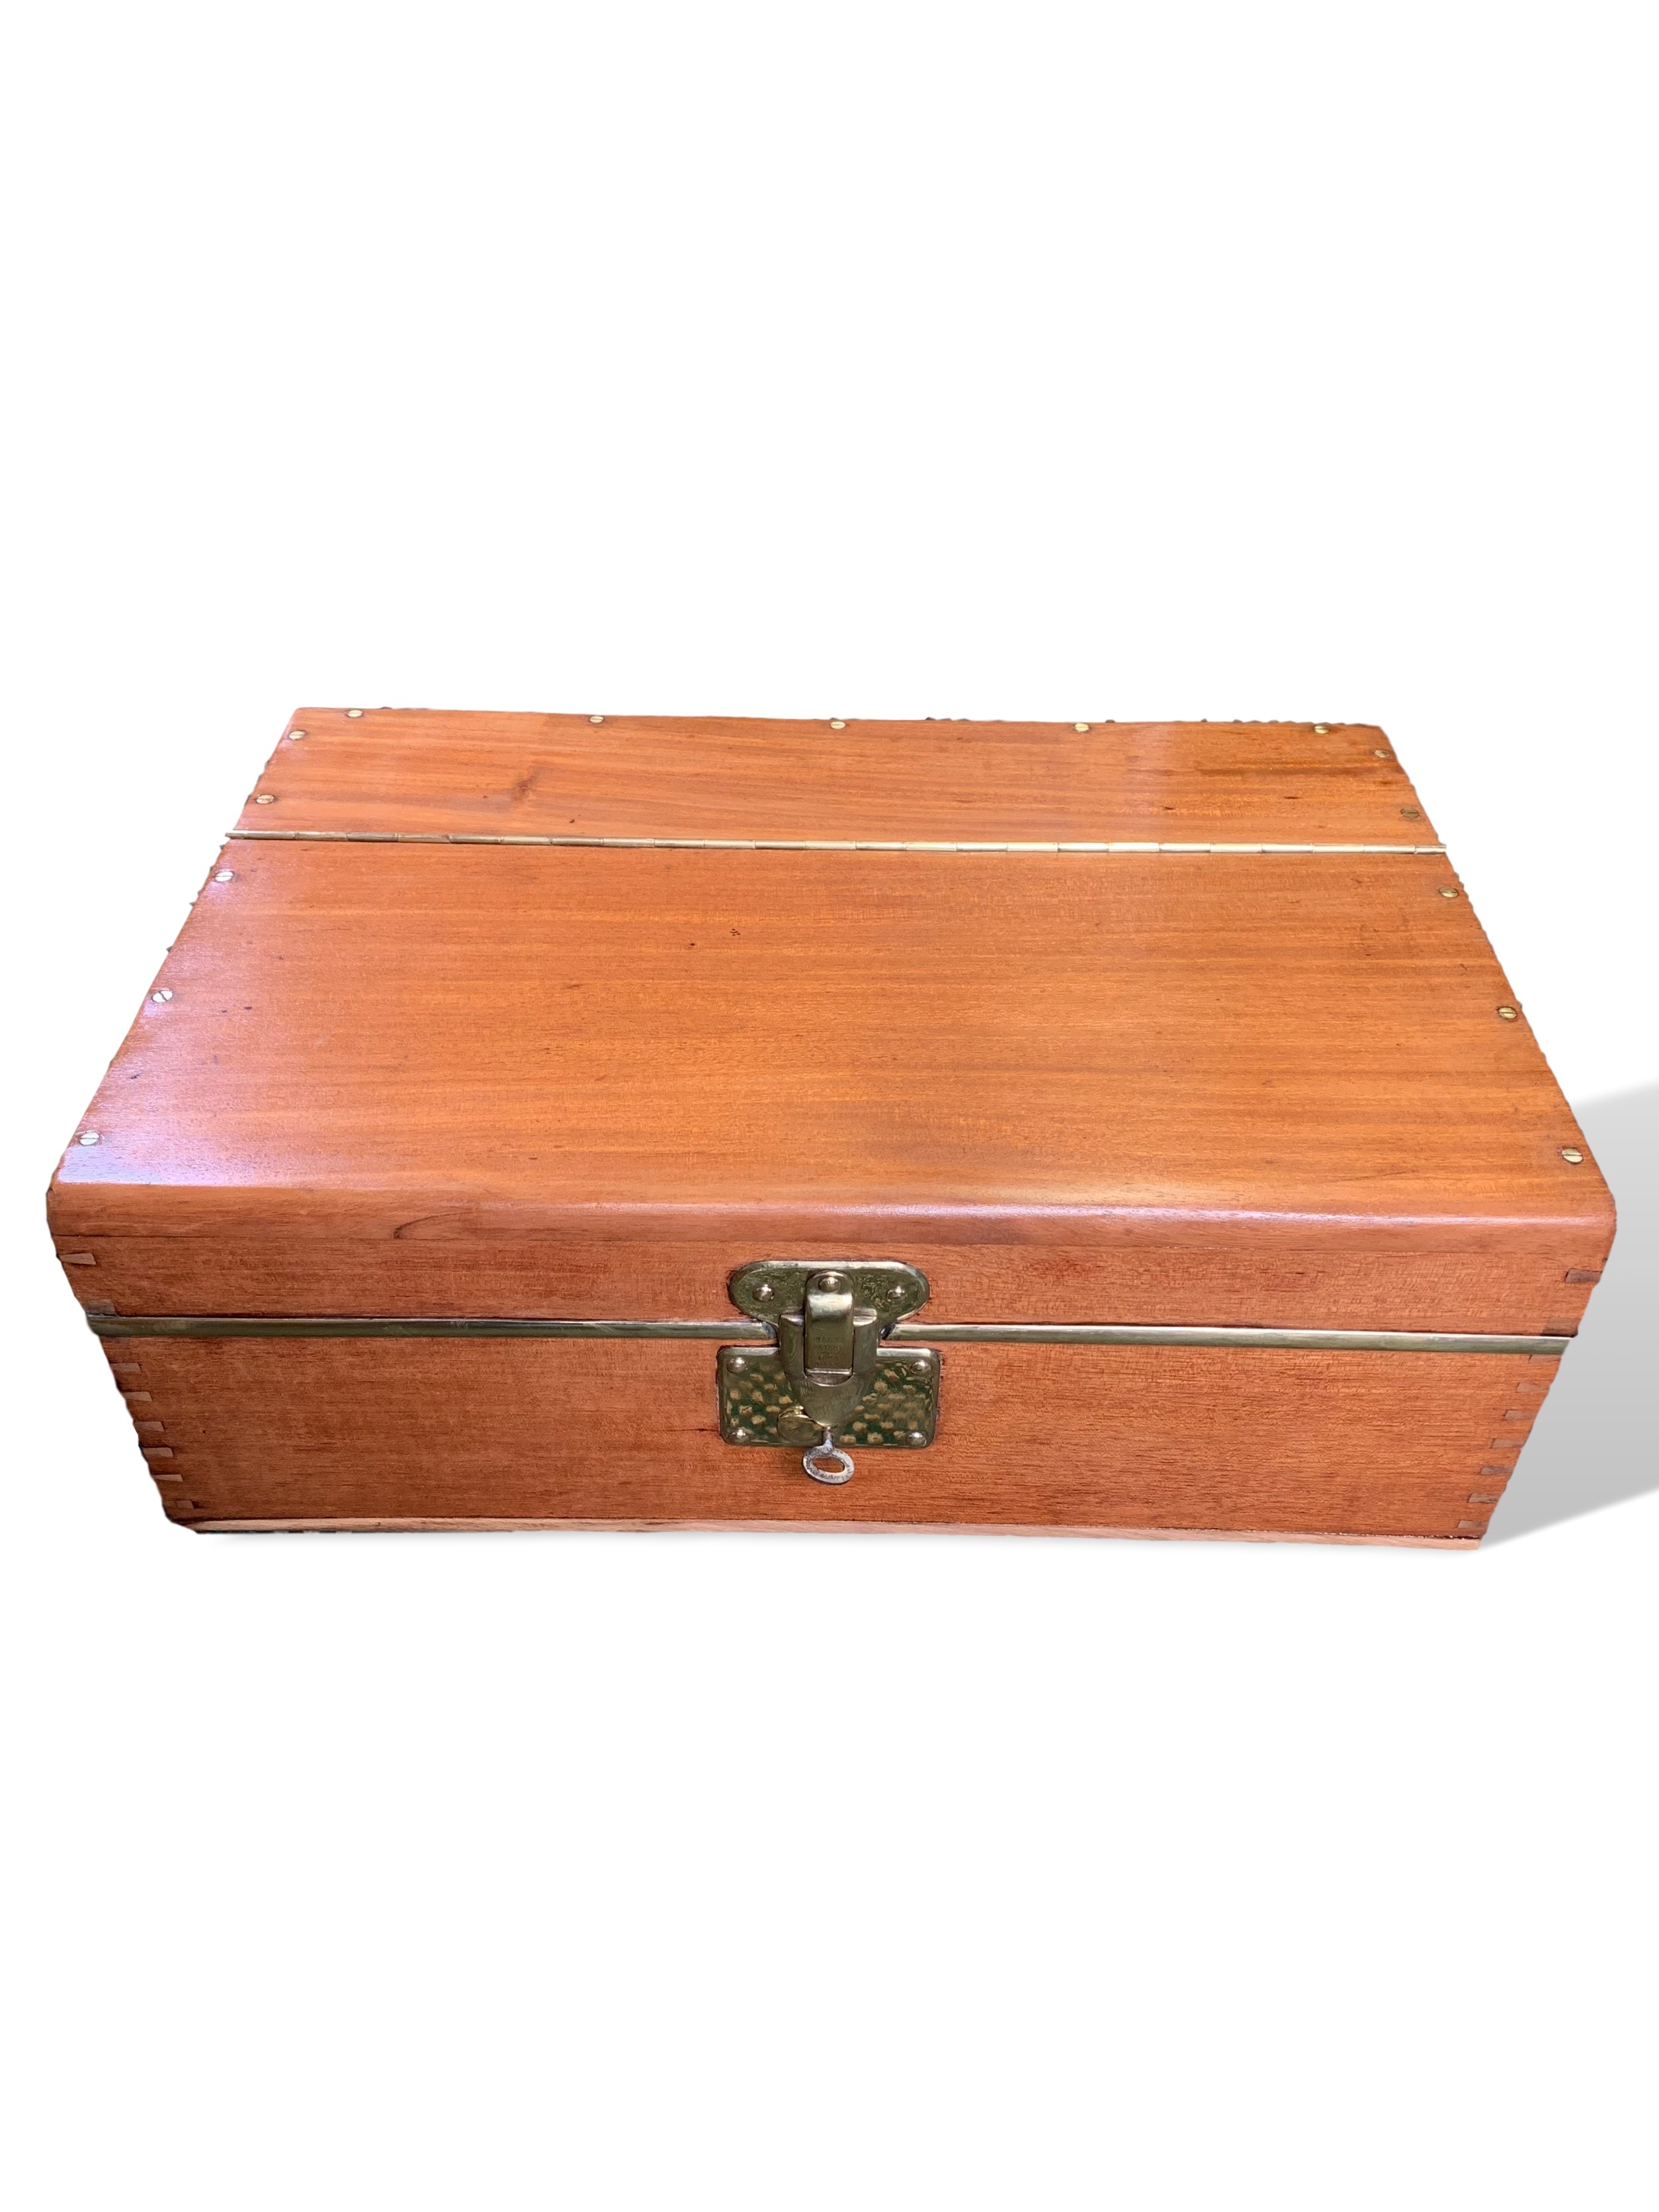 Rare Louis Vuitton toolbox originally fitted to the running board of a vintage car. Wood with bra